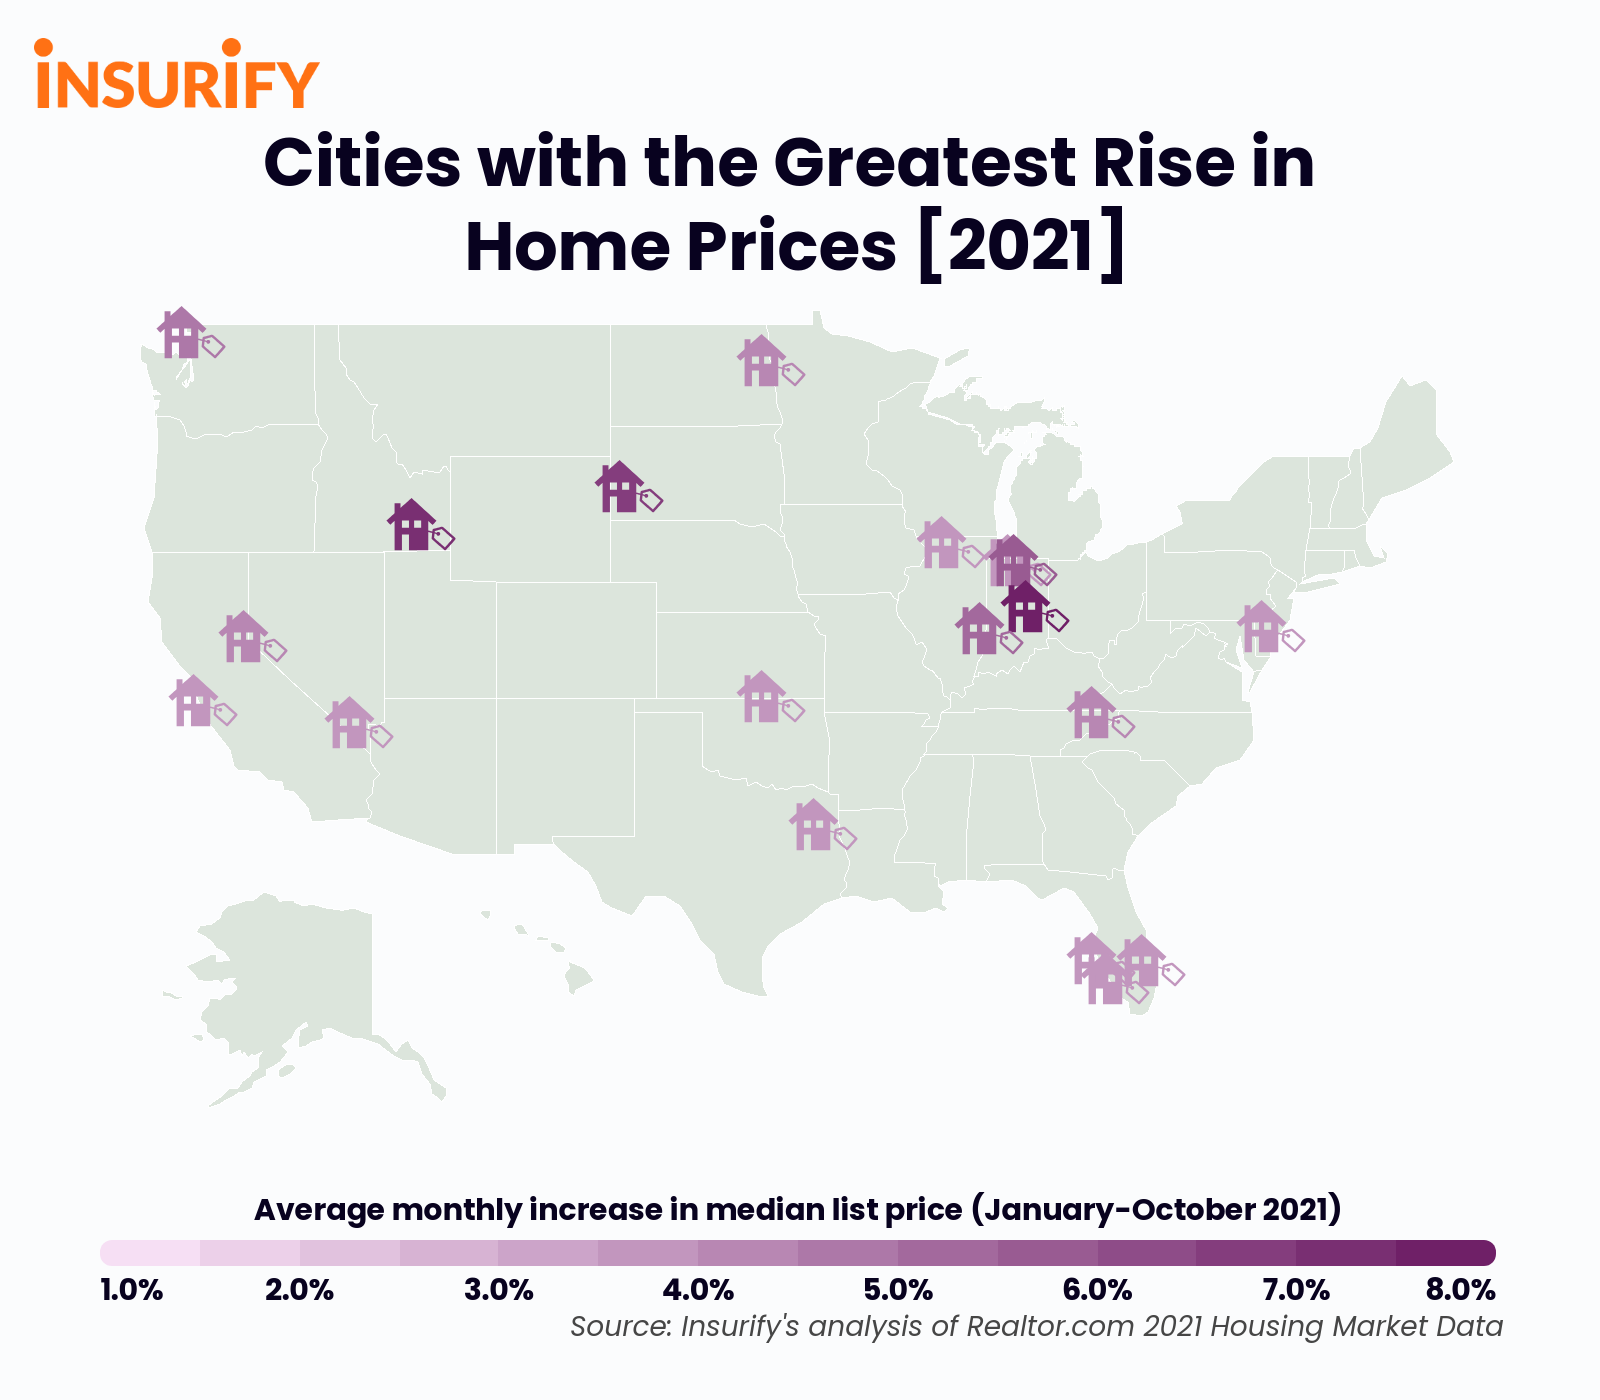 Icon map showing the 20 cities with the greatest monthly increase in house prices in 2021.